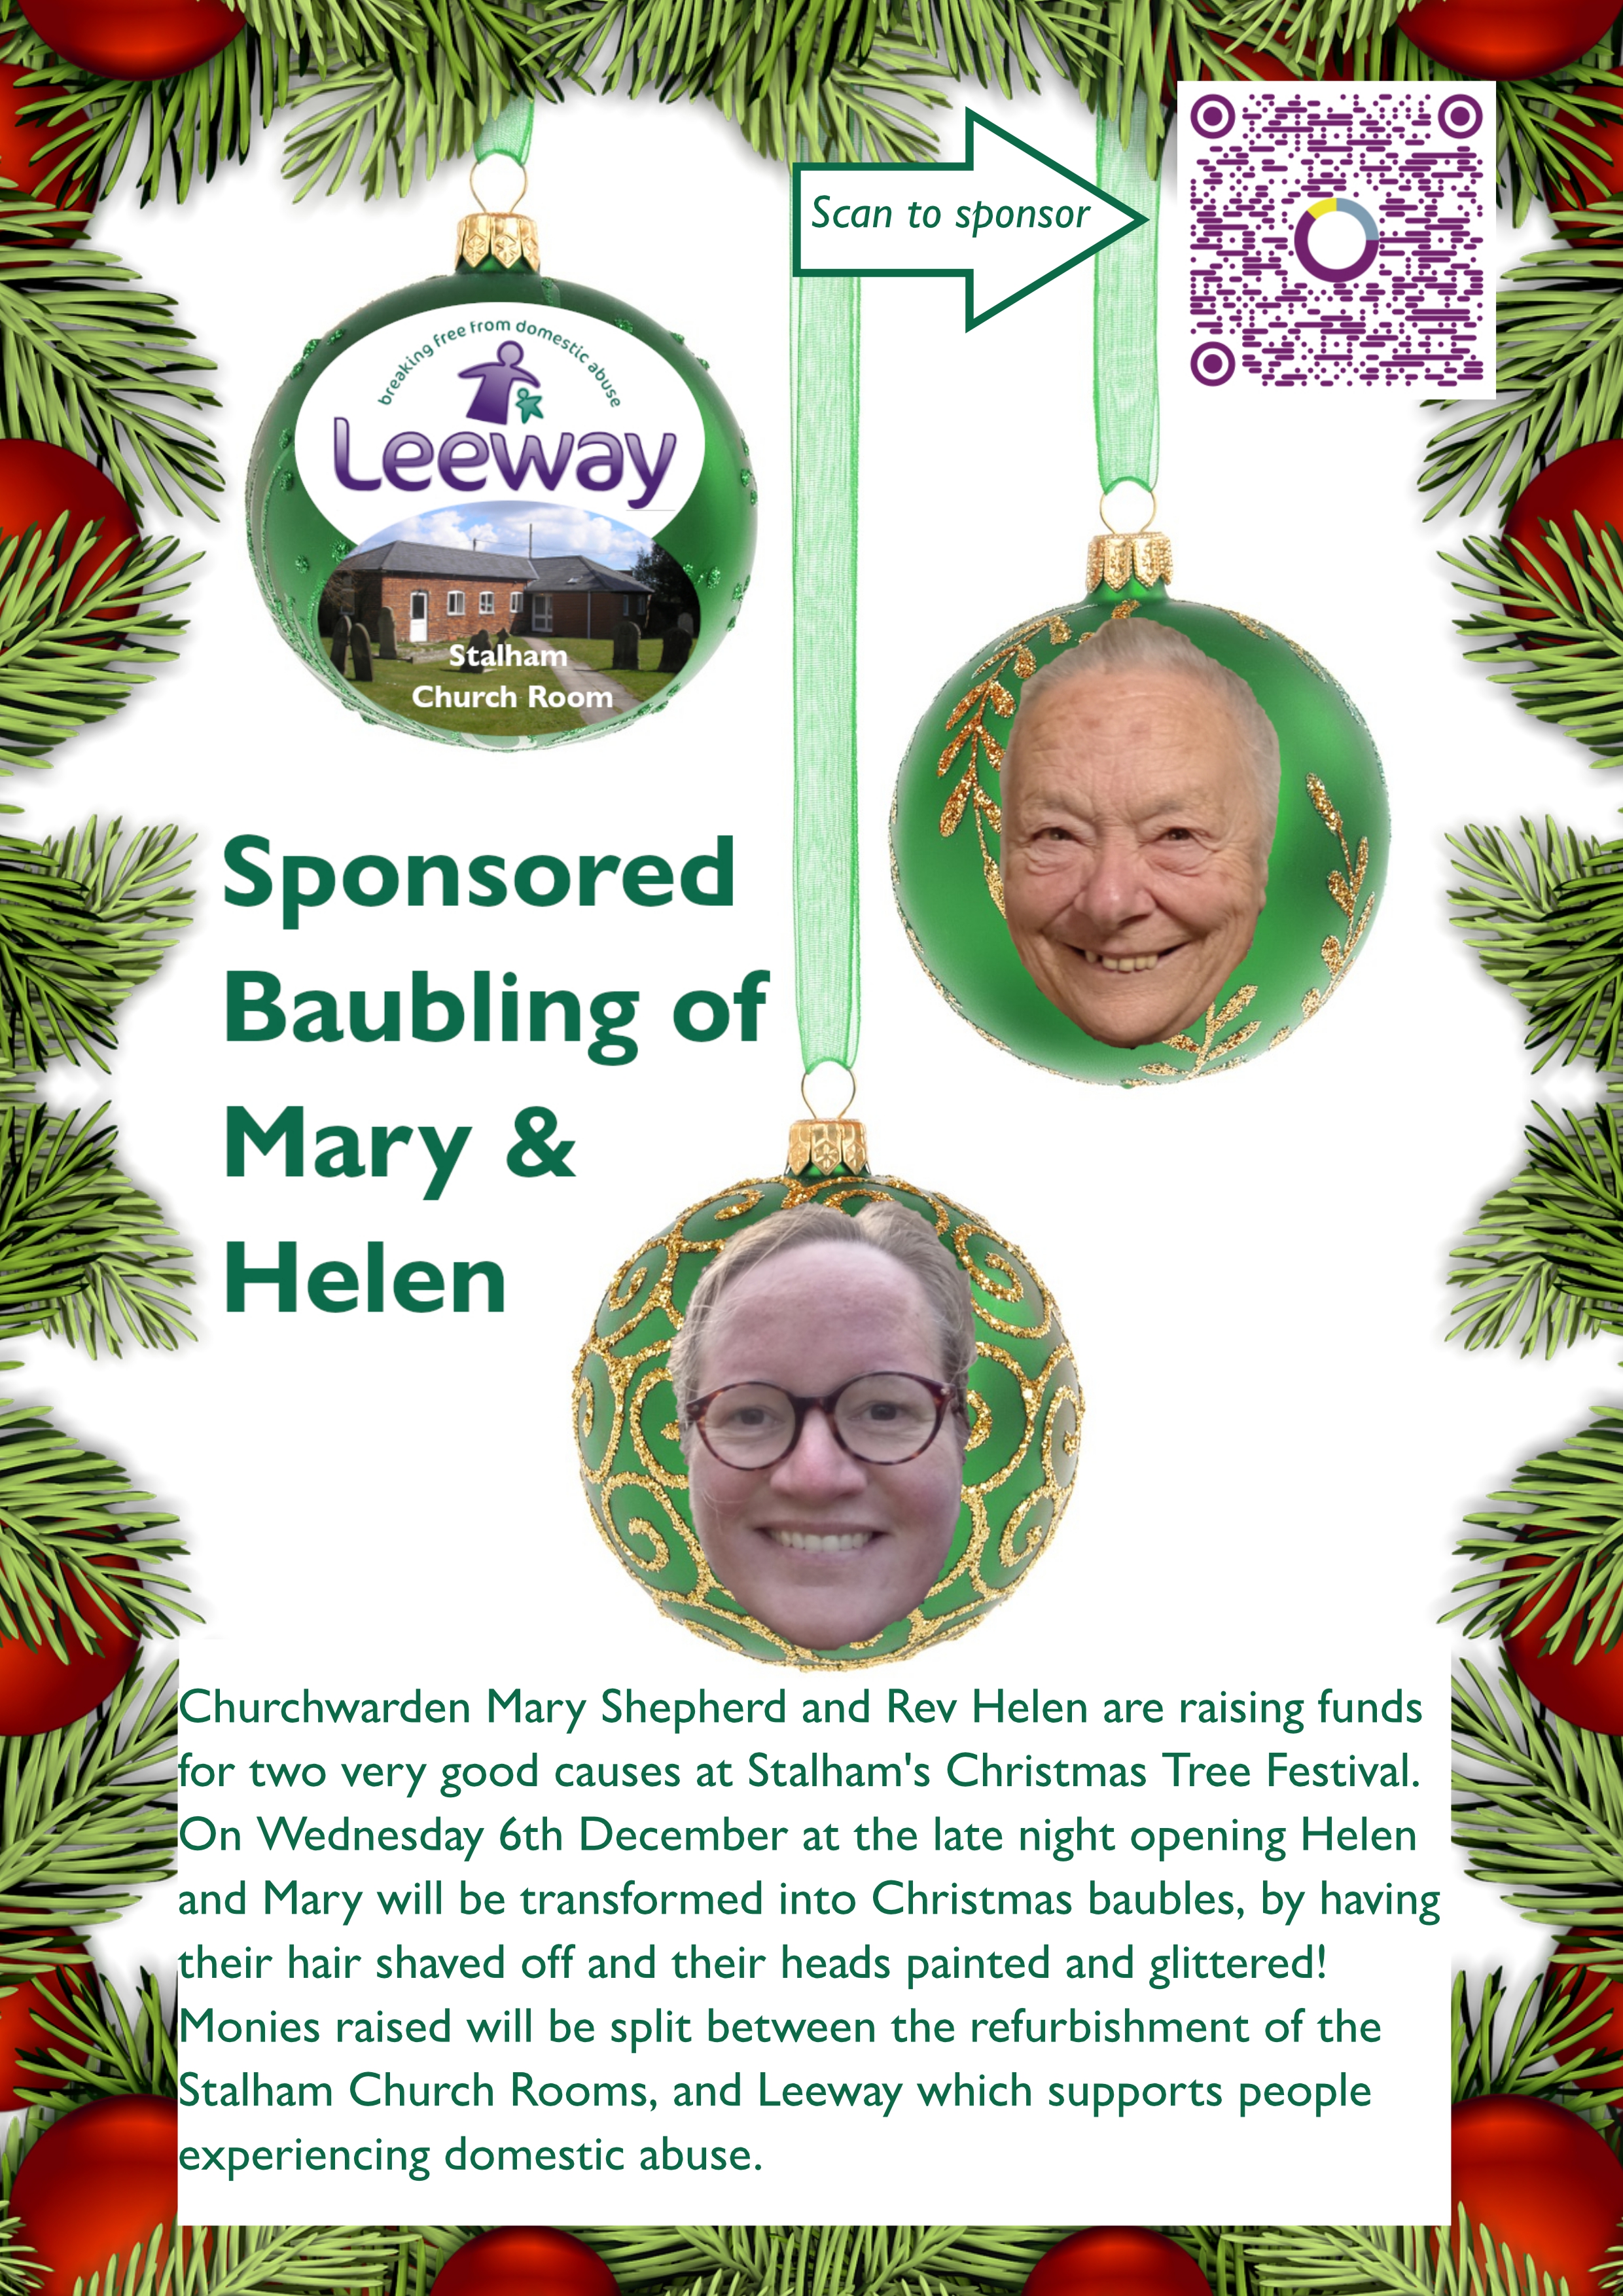 Sponsored baubling - raising money for Leeway and Stalham Church Rooms